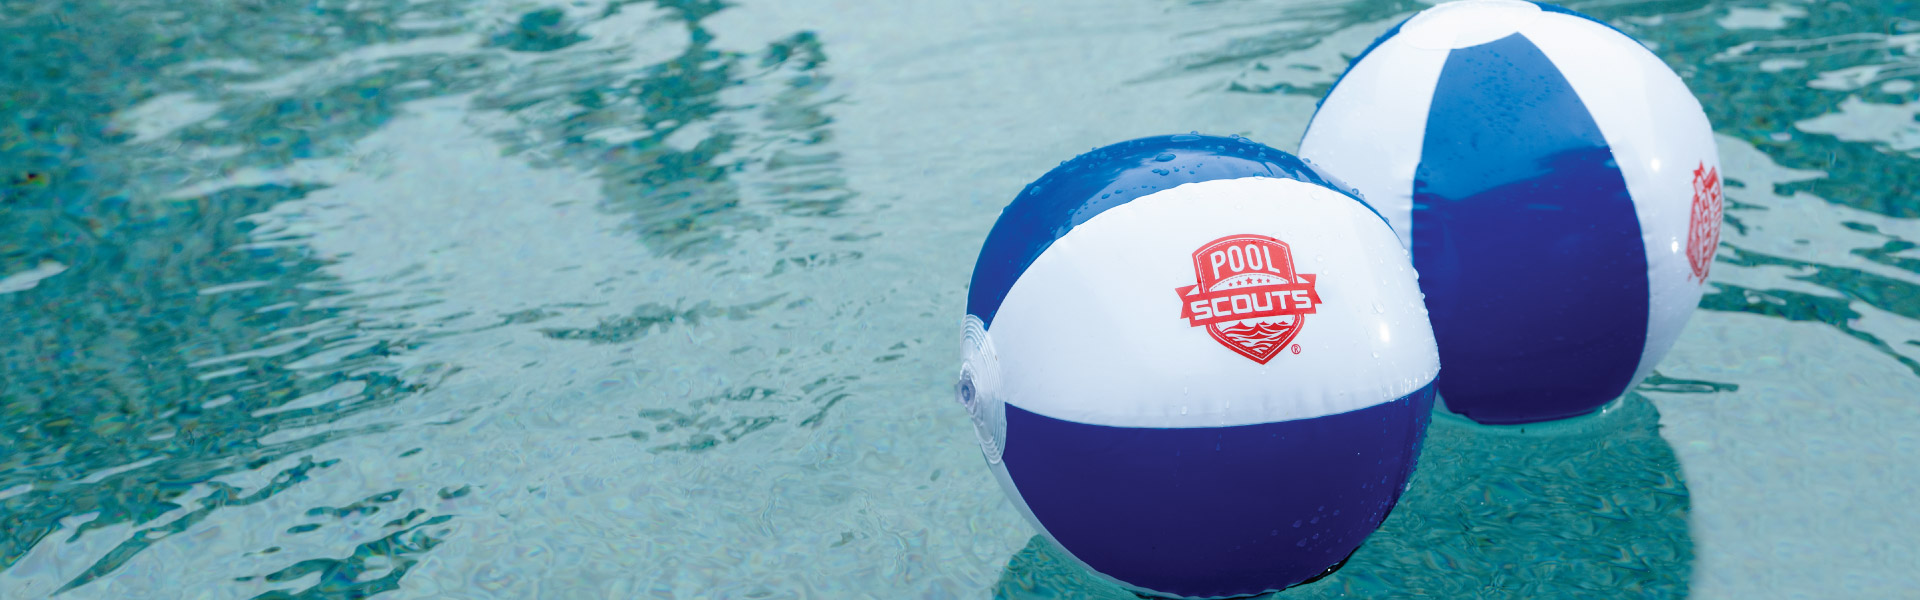 Beach balls with Pool Scouts logo in pool